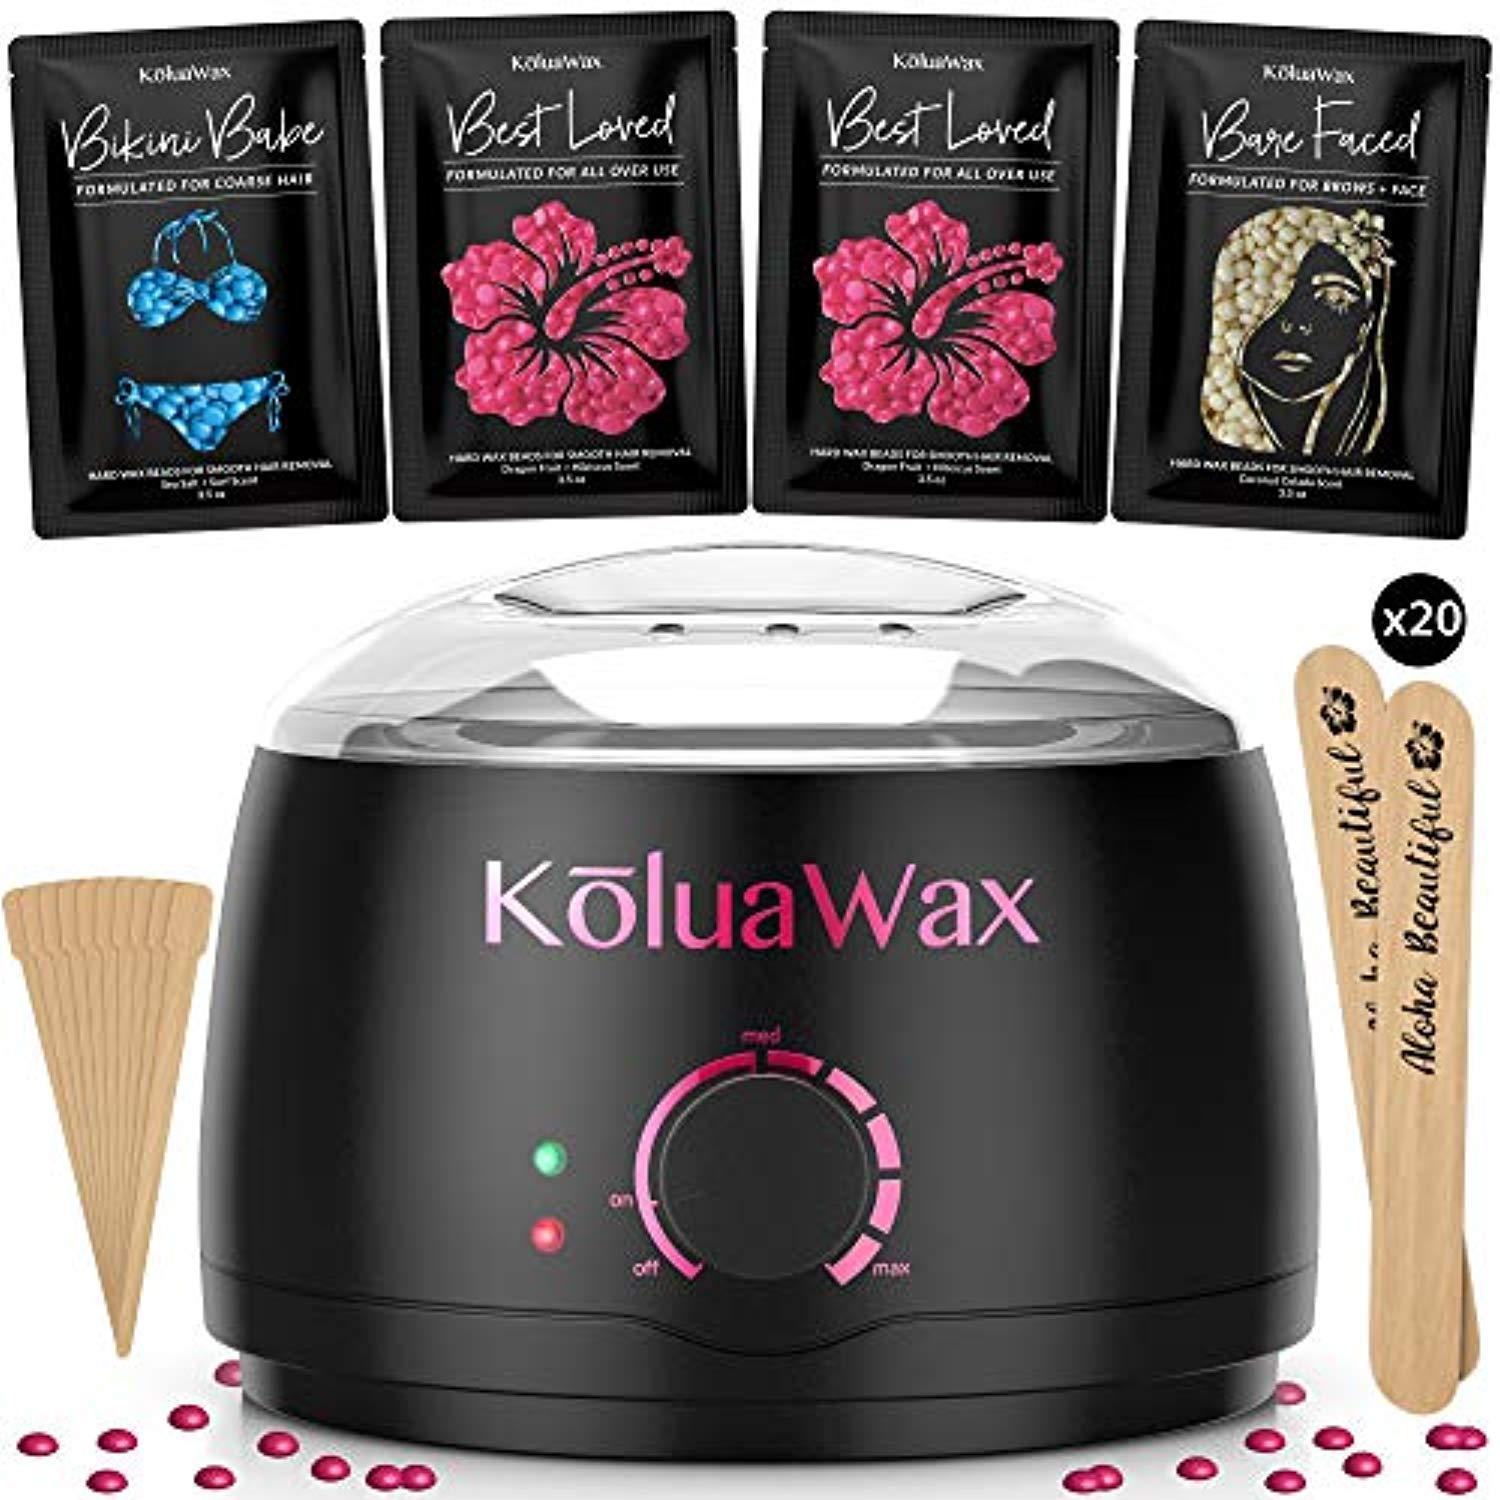 Evomosa Home Hard Waxing Kits for Women & Men, Wax Warmer for Hair Removal  Kit for Leg, Face, Armpit, Eyebrows 